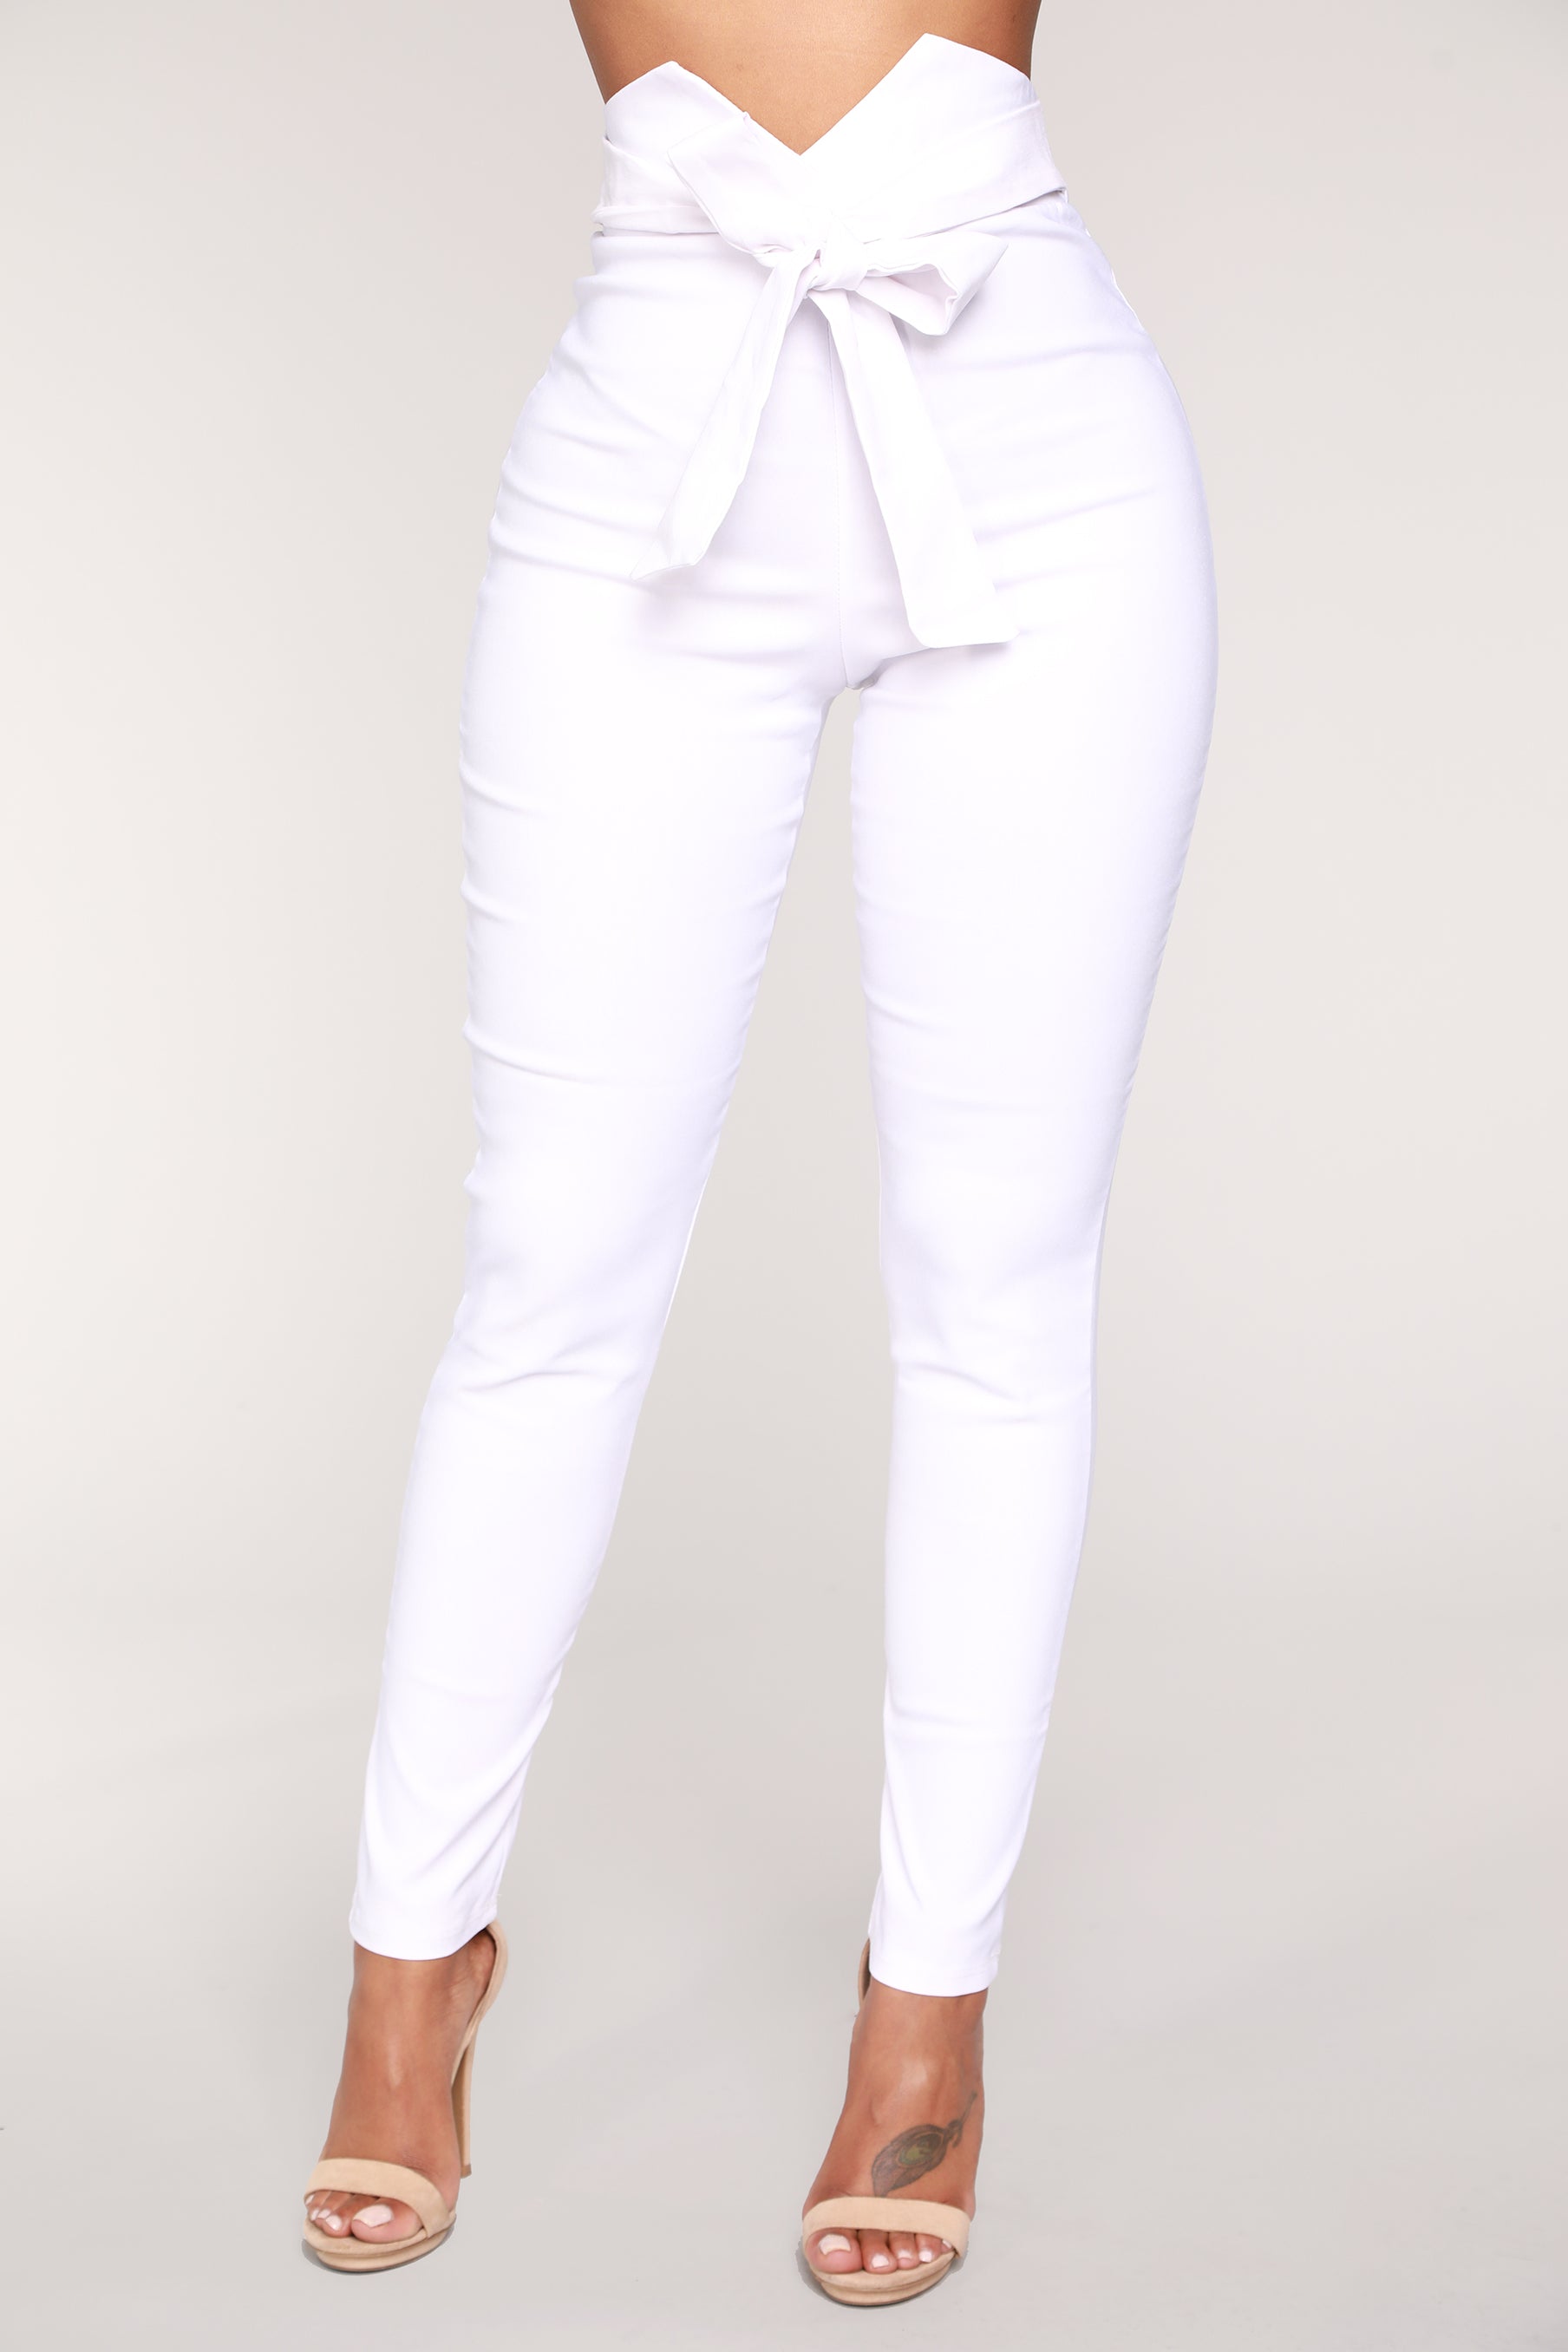 Knot Your Girl Pants - White